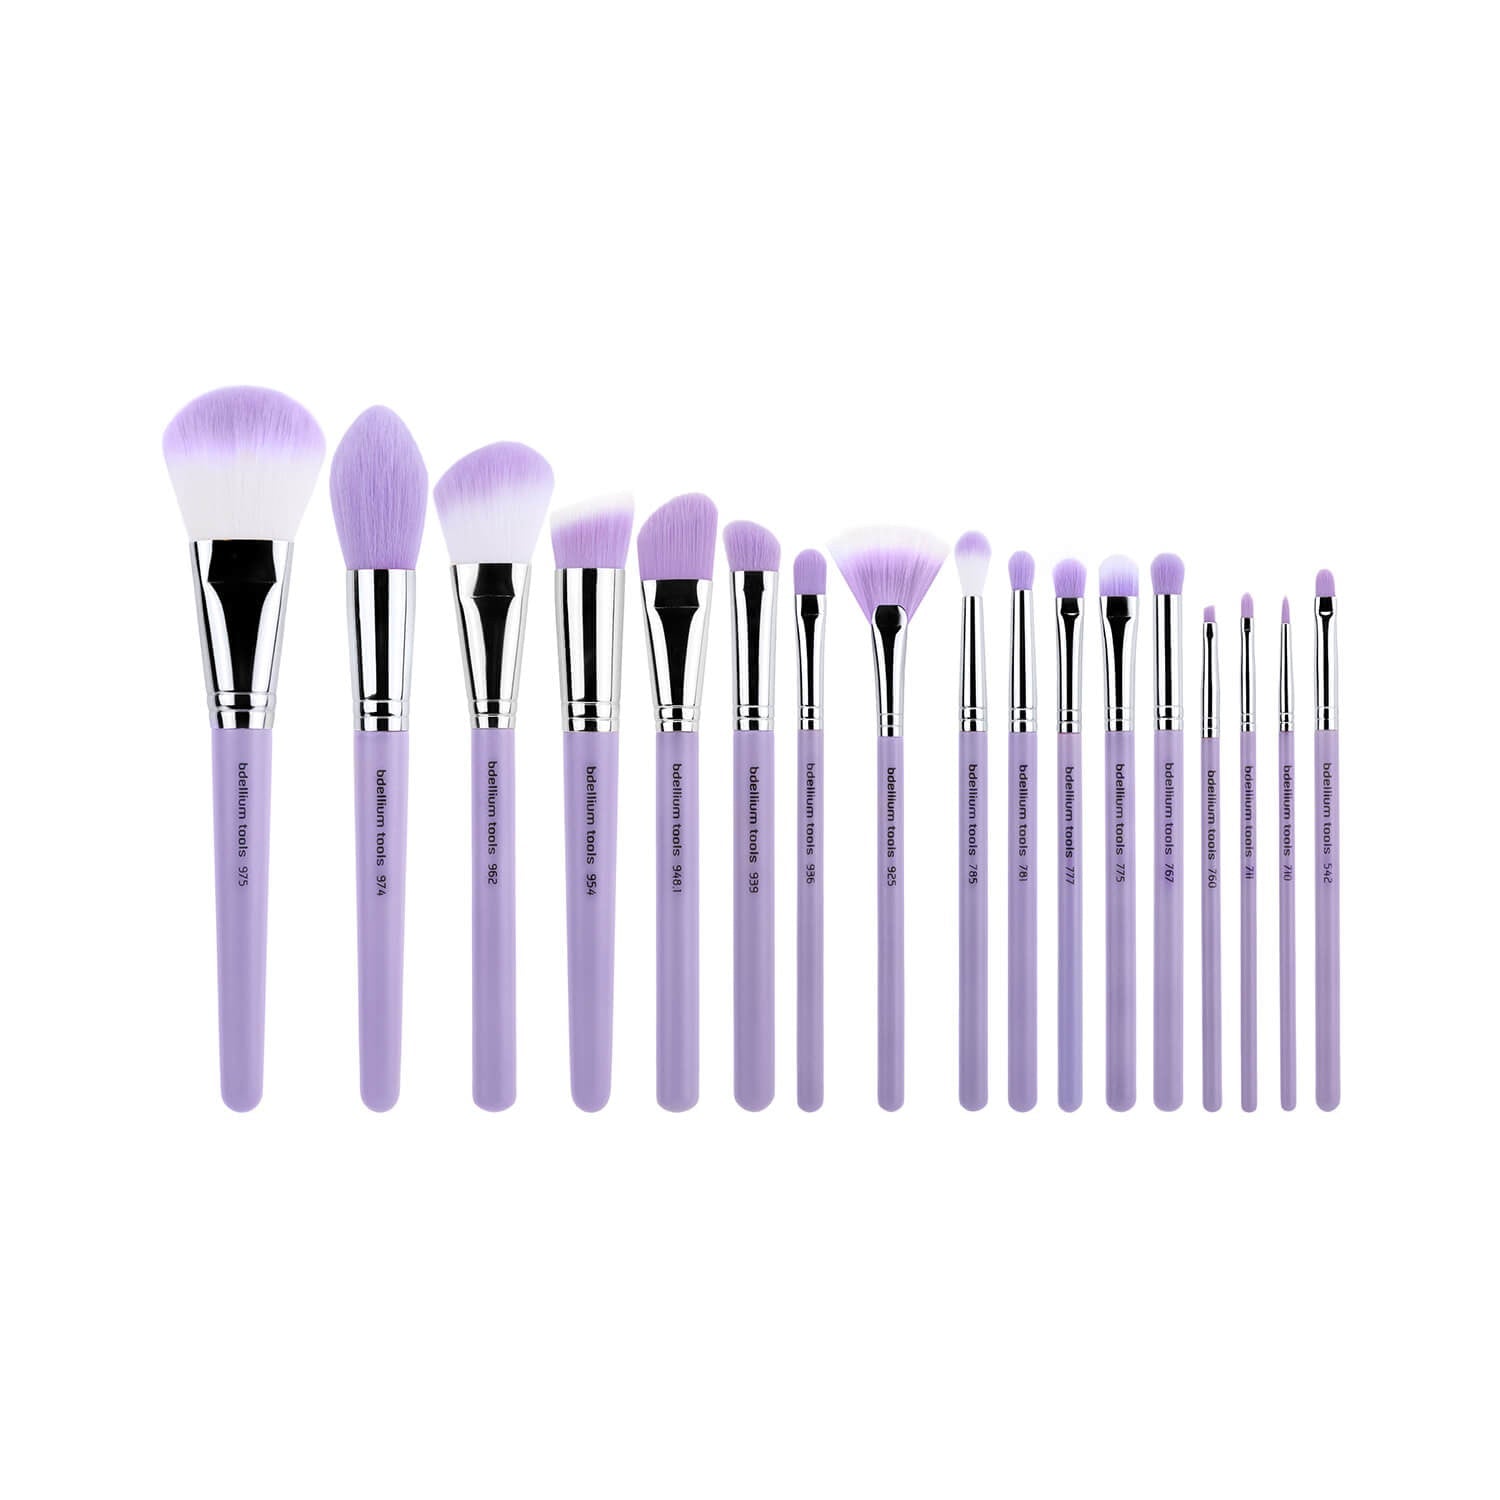 bdellium Tools - PURPLE BAMBU - PRECISION 17PC. BRUSH SET WITH ROLL-UP POUCH